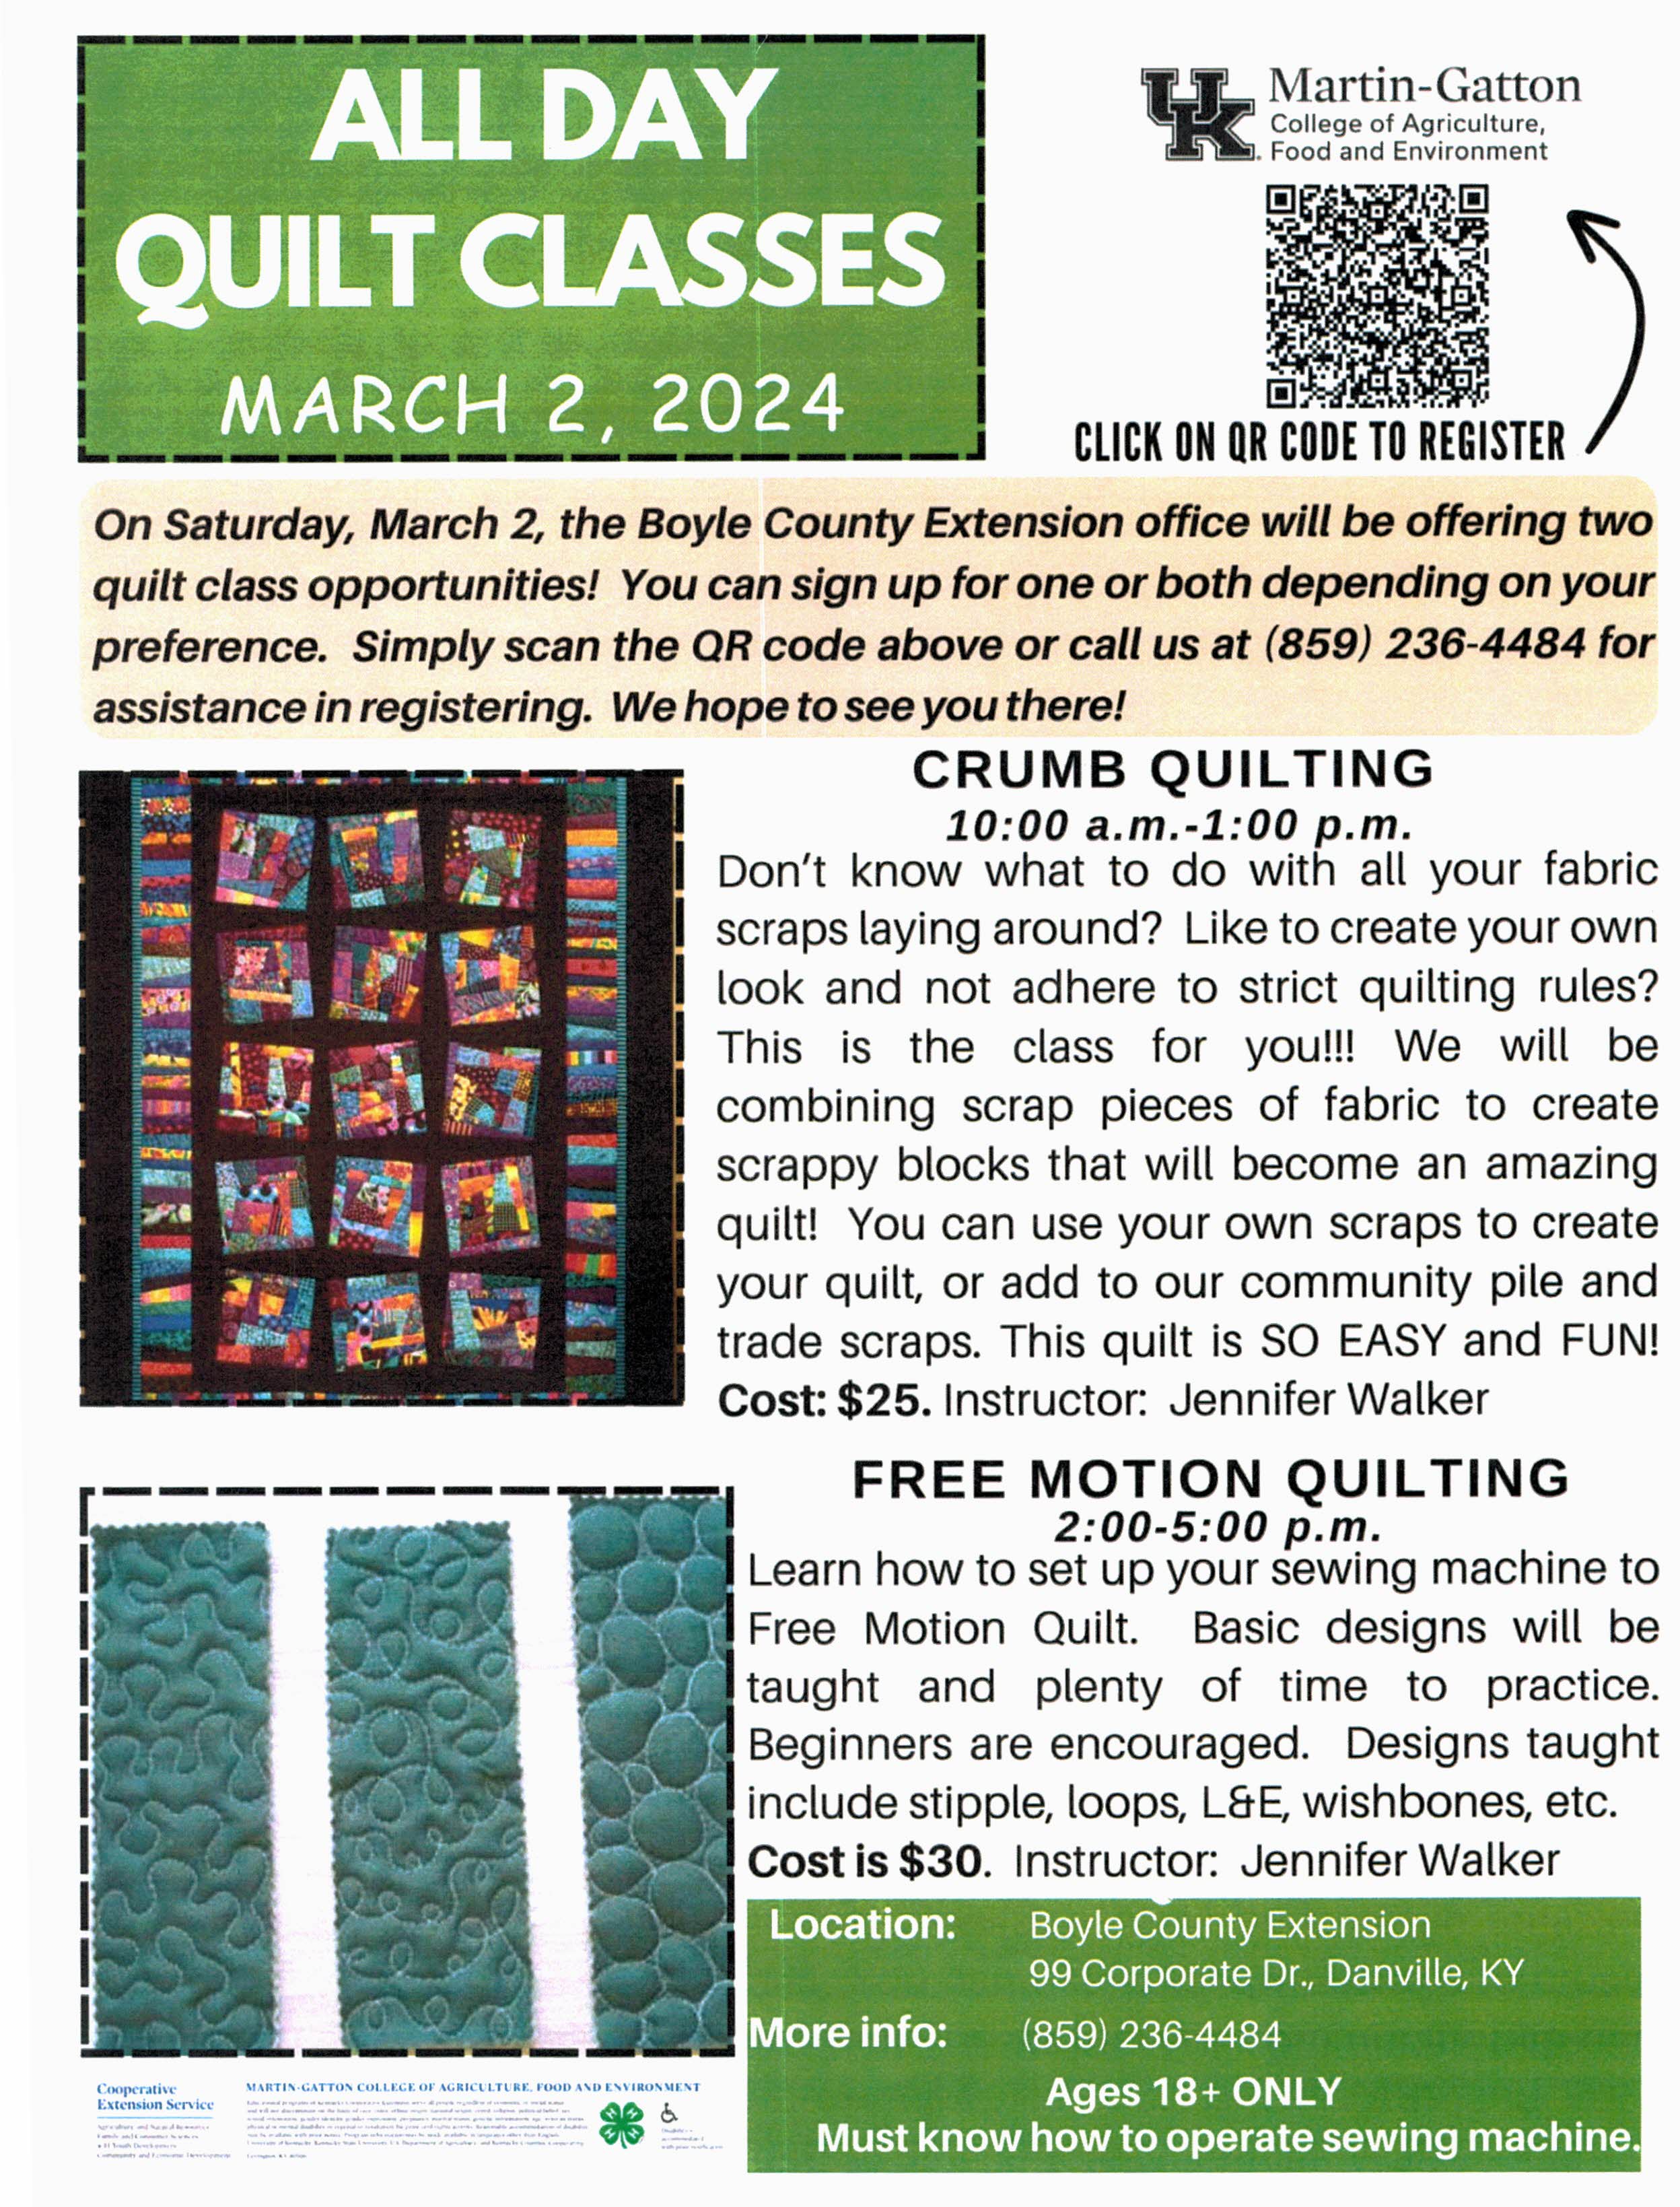 All Day Quilt Classes